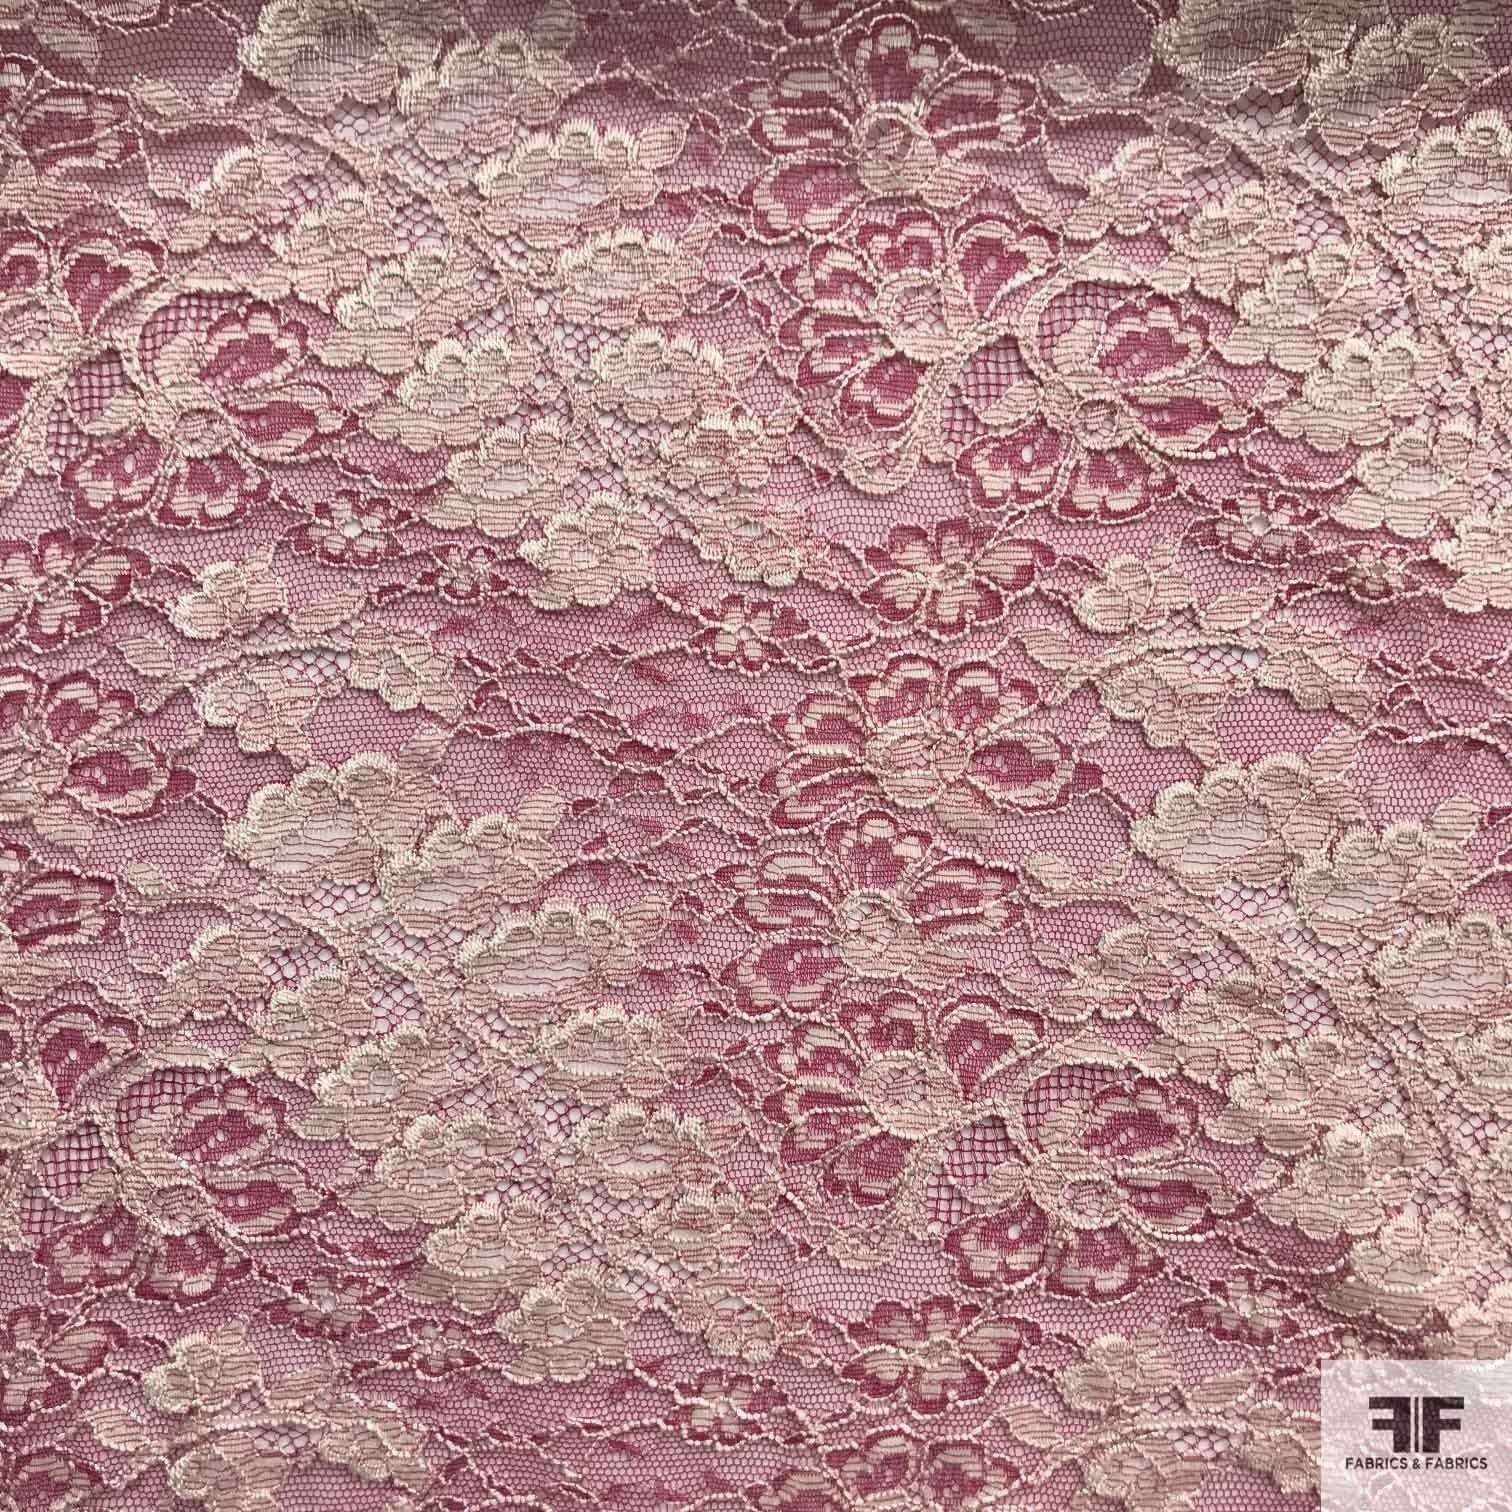 Handwoven Double Scalloped Edge Trim - Pink